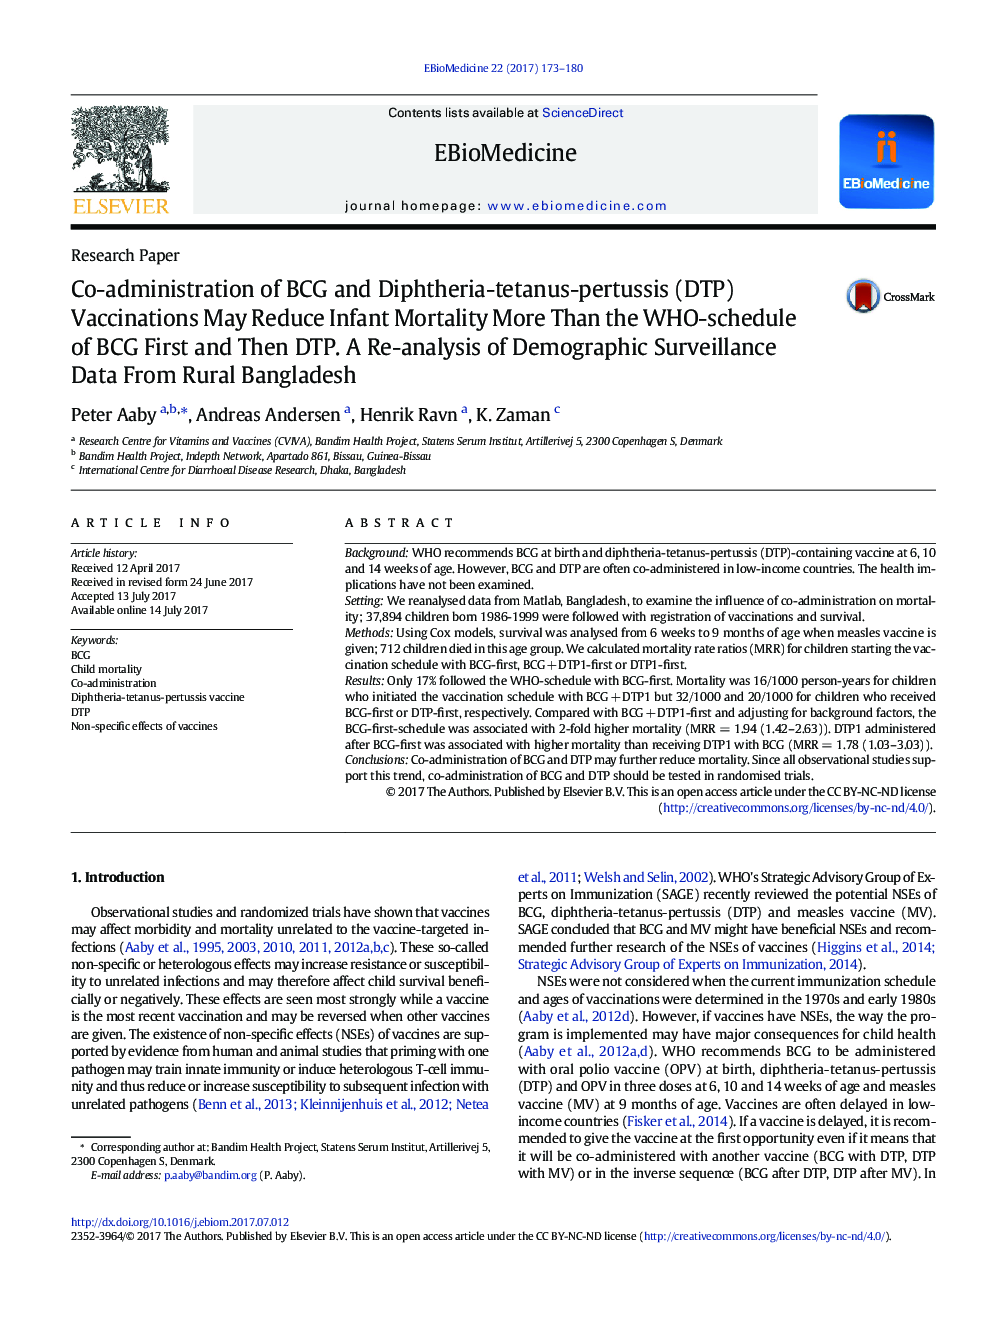 Co-administration of BCG and Diphtheria-tetanus-pertussis (DTP) Vaccinations May Reduce Infant Mortality More Than the WHO-schedule of BCG First and Then DTP. A Re-analysis of Demographic Surveillance Data From Rural Bangladesh